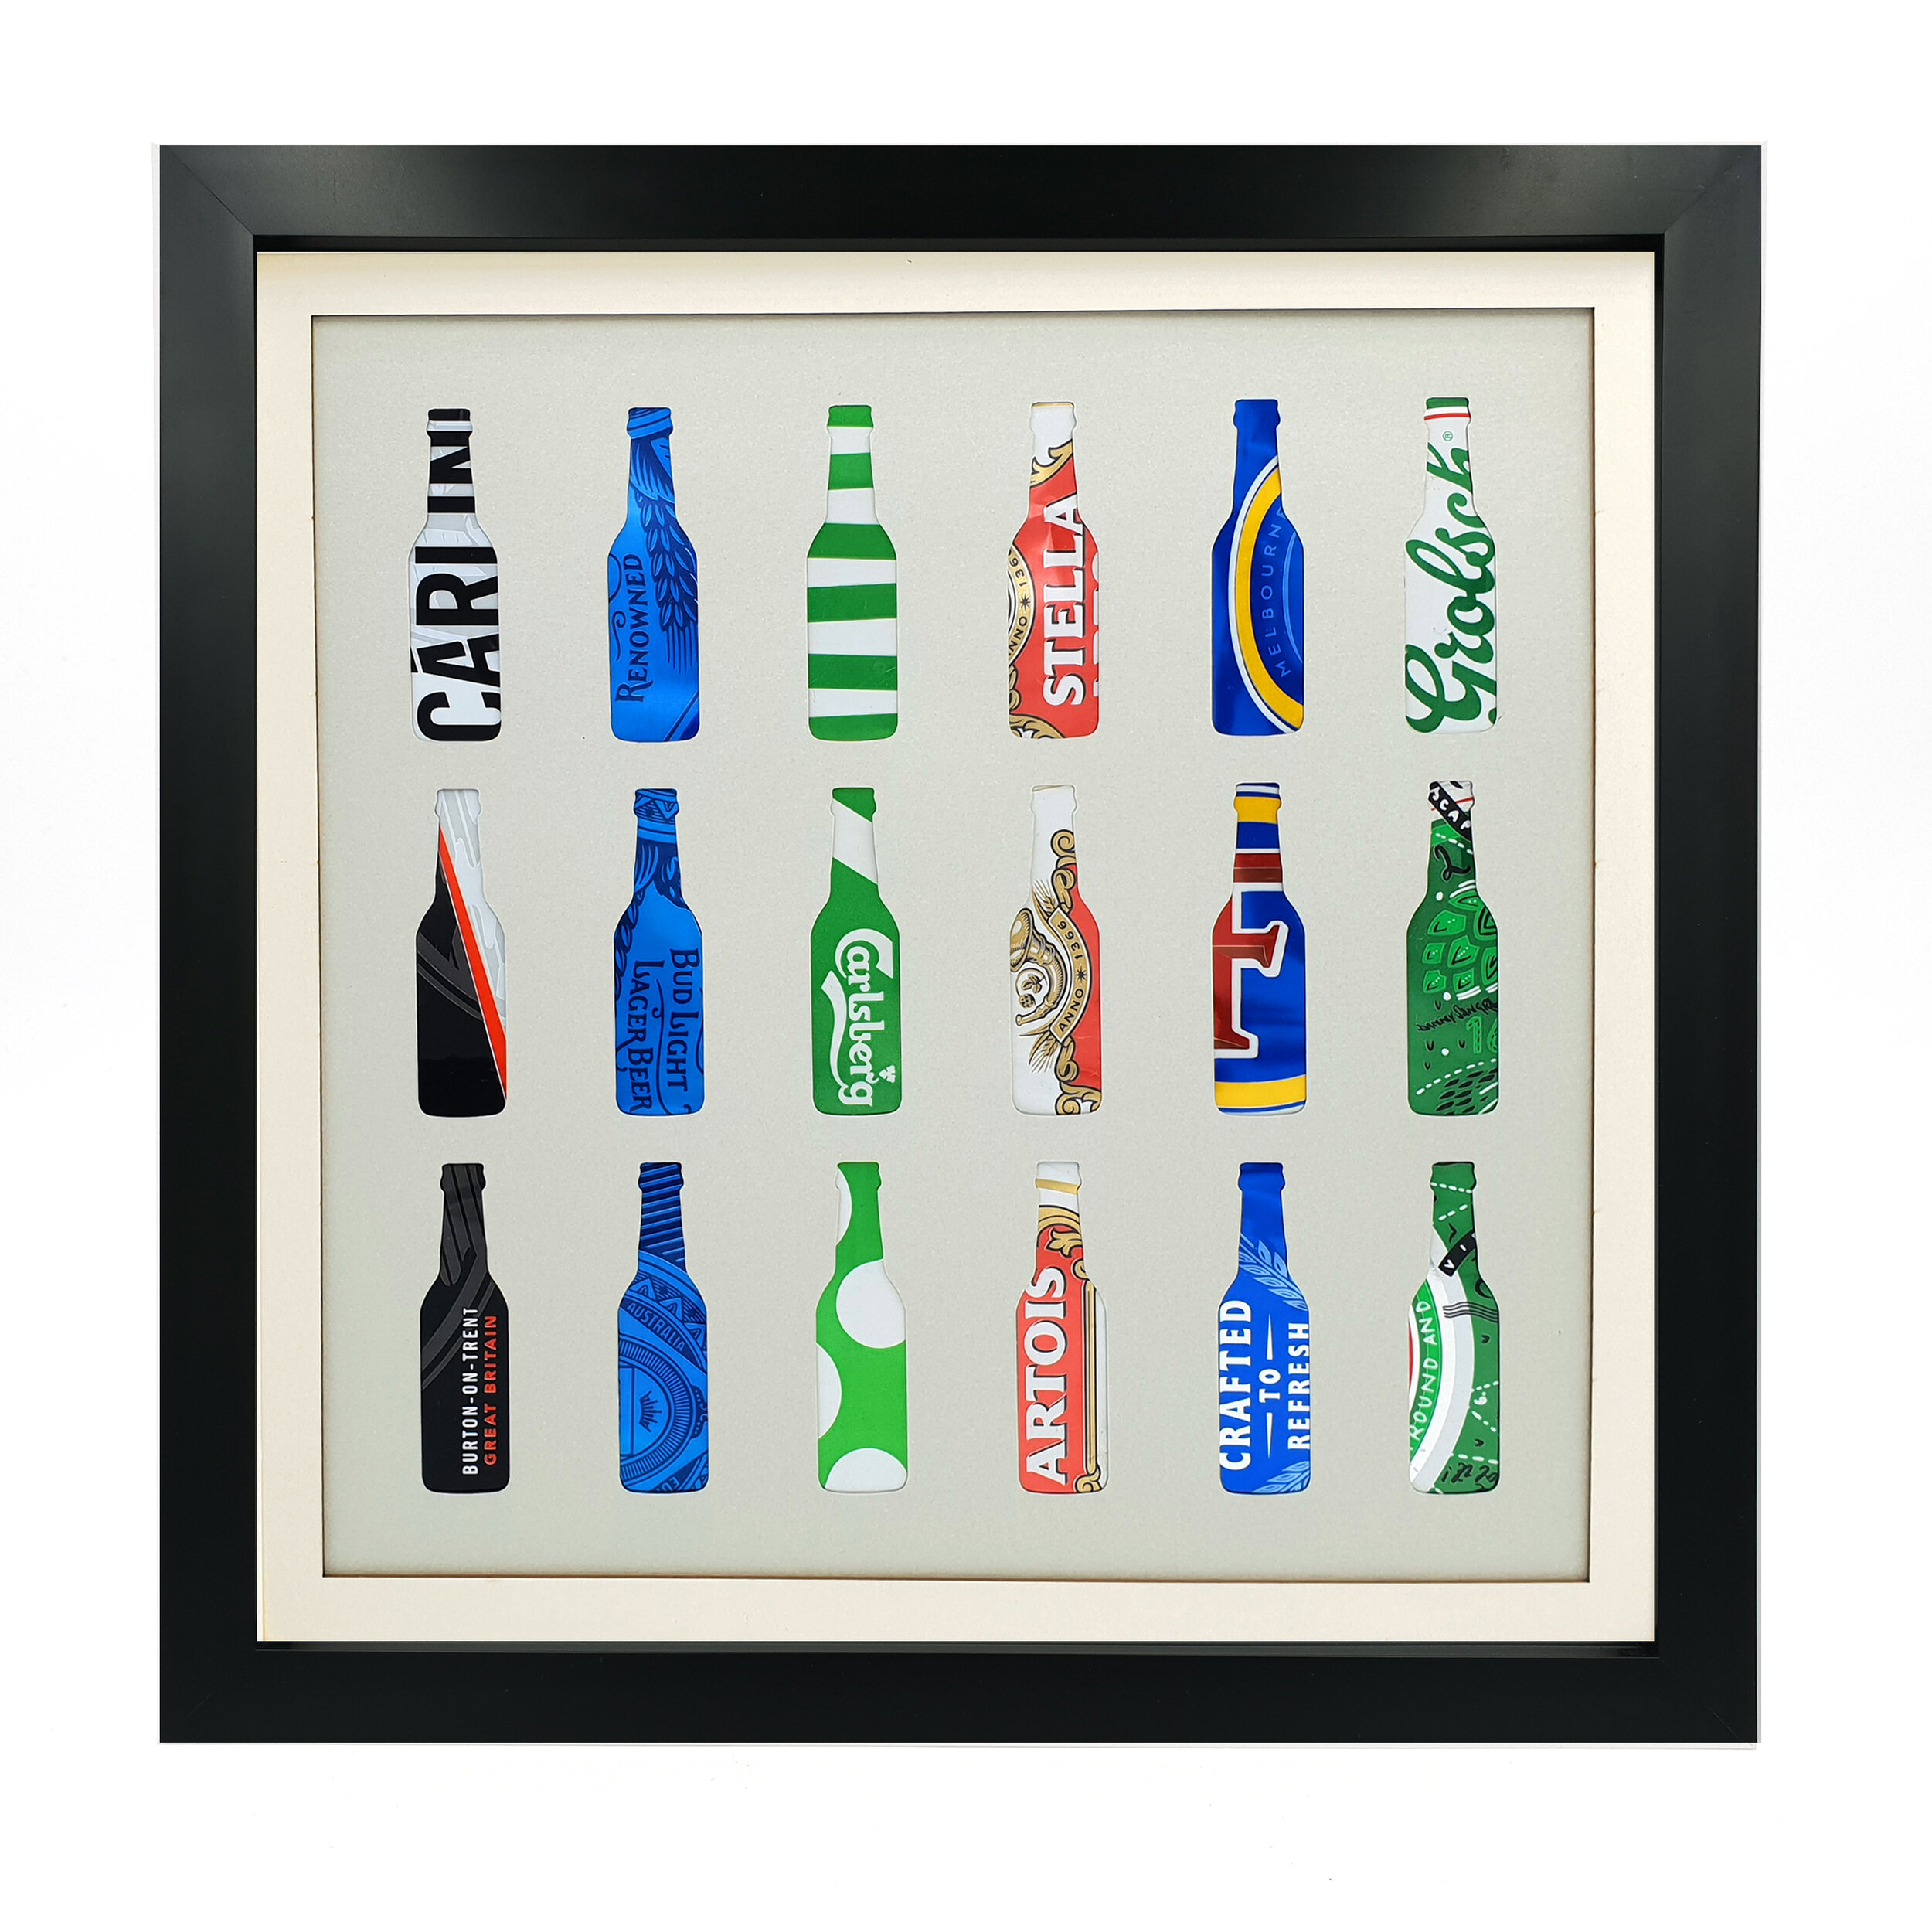 Six Lagers Silhouette vibrant upcycled can eco art black frame 